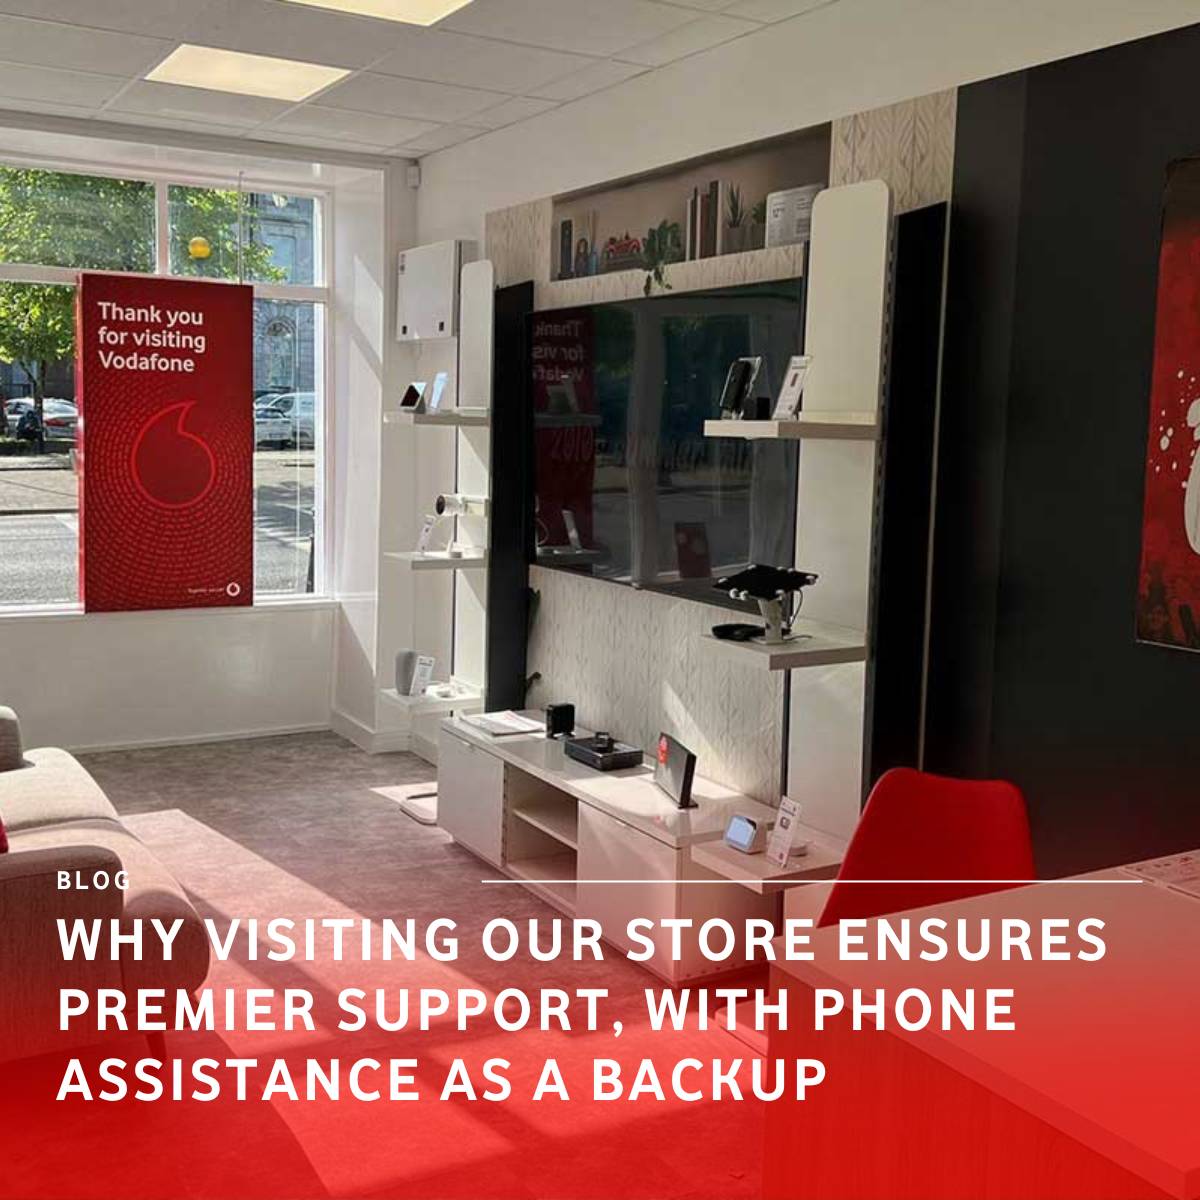 Why Visiting Our Store Ensures Premier Support, with Phone Assistance as a Backup